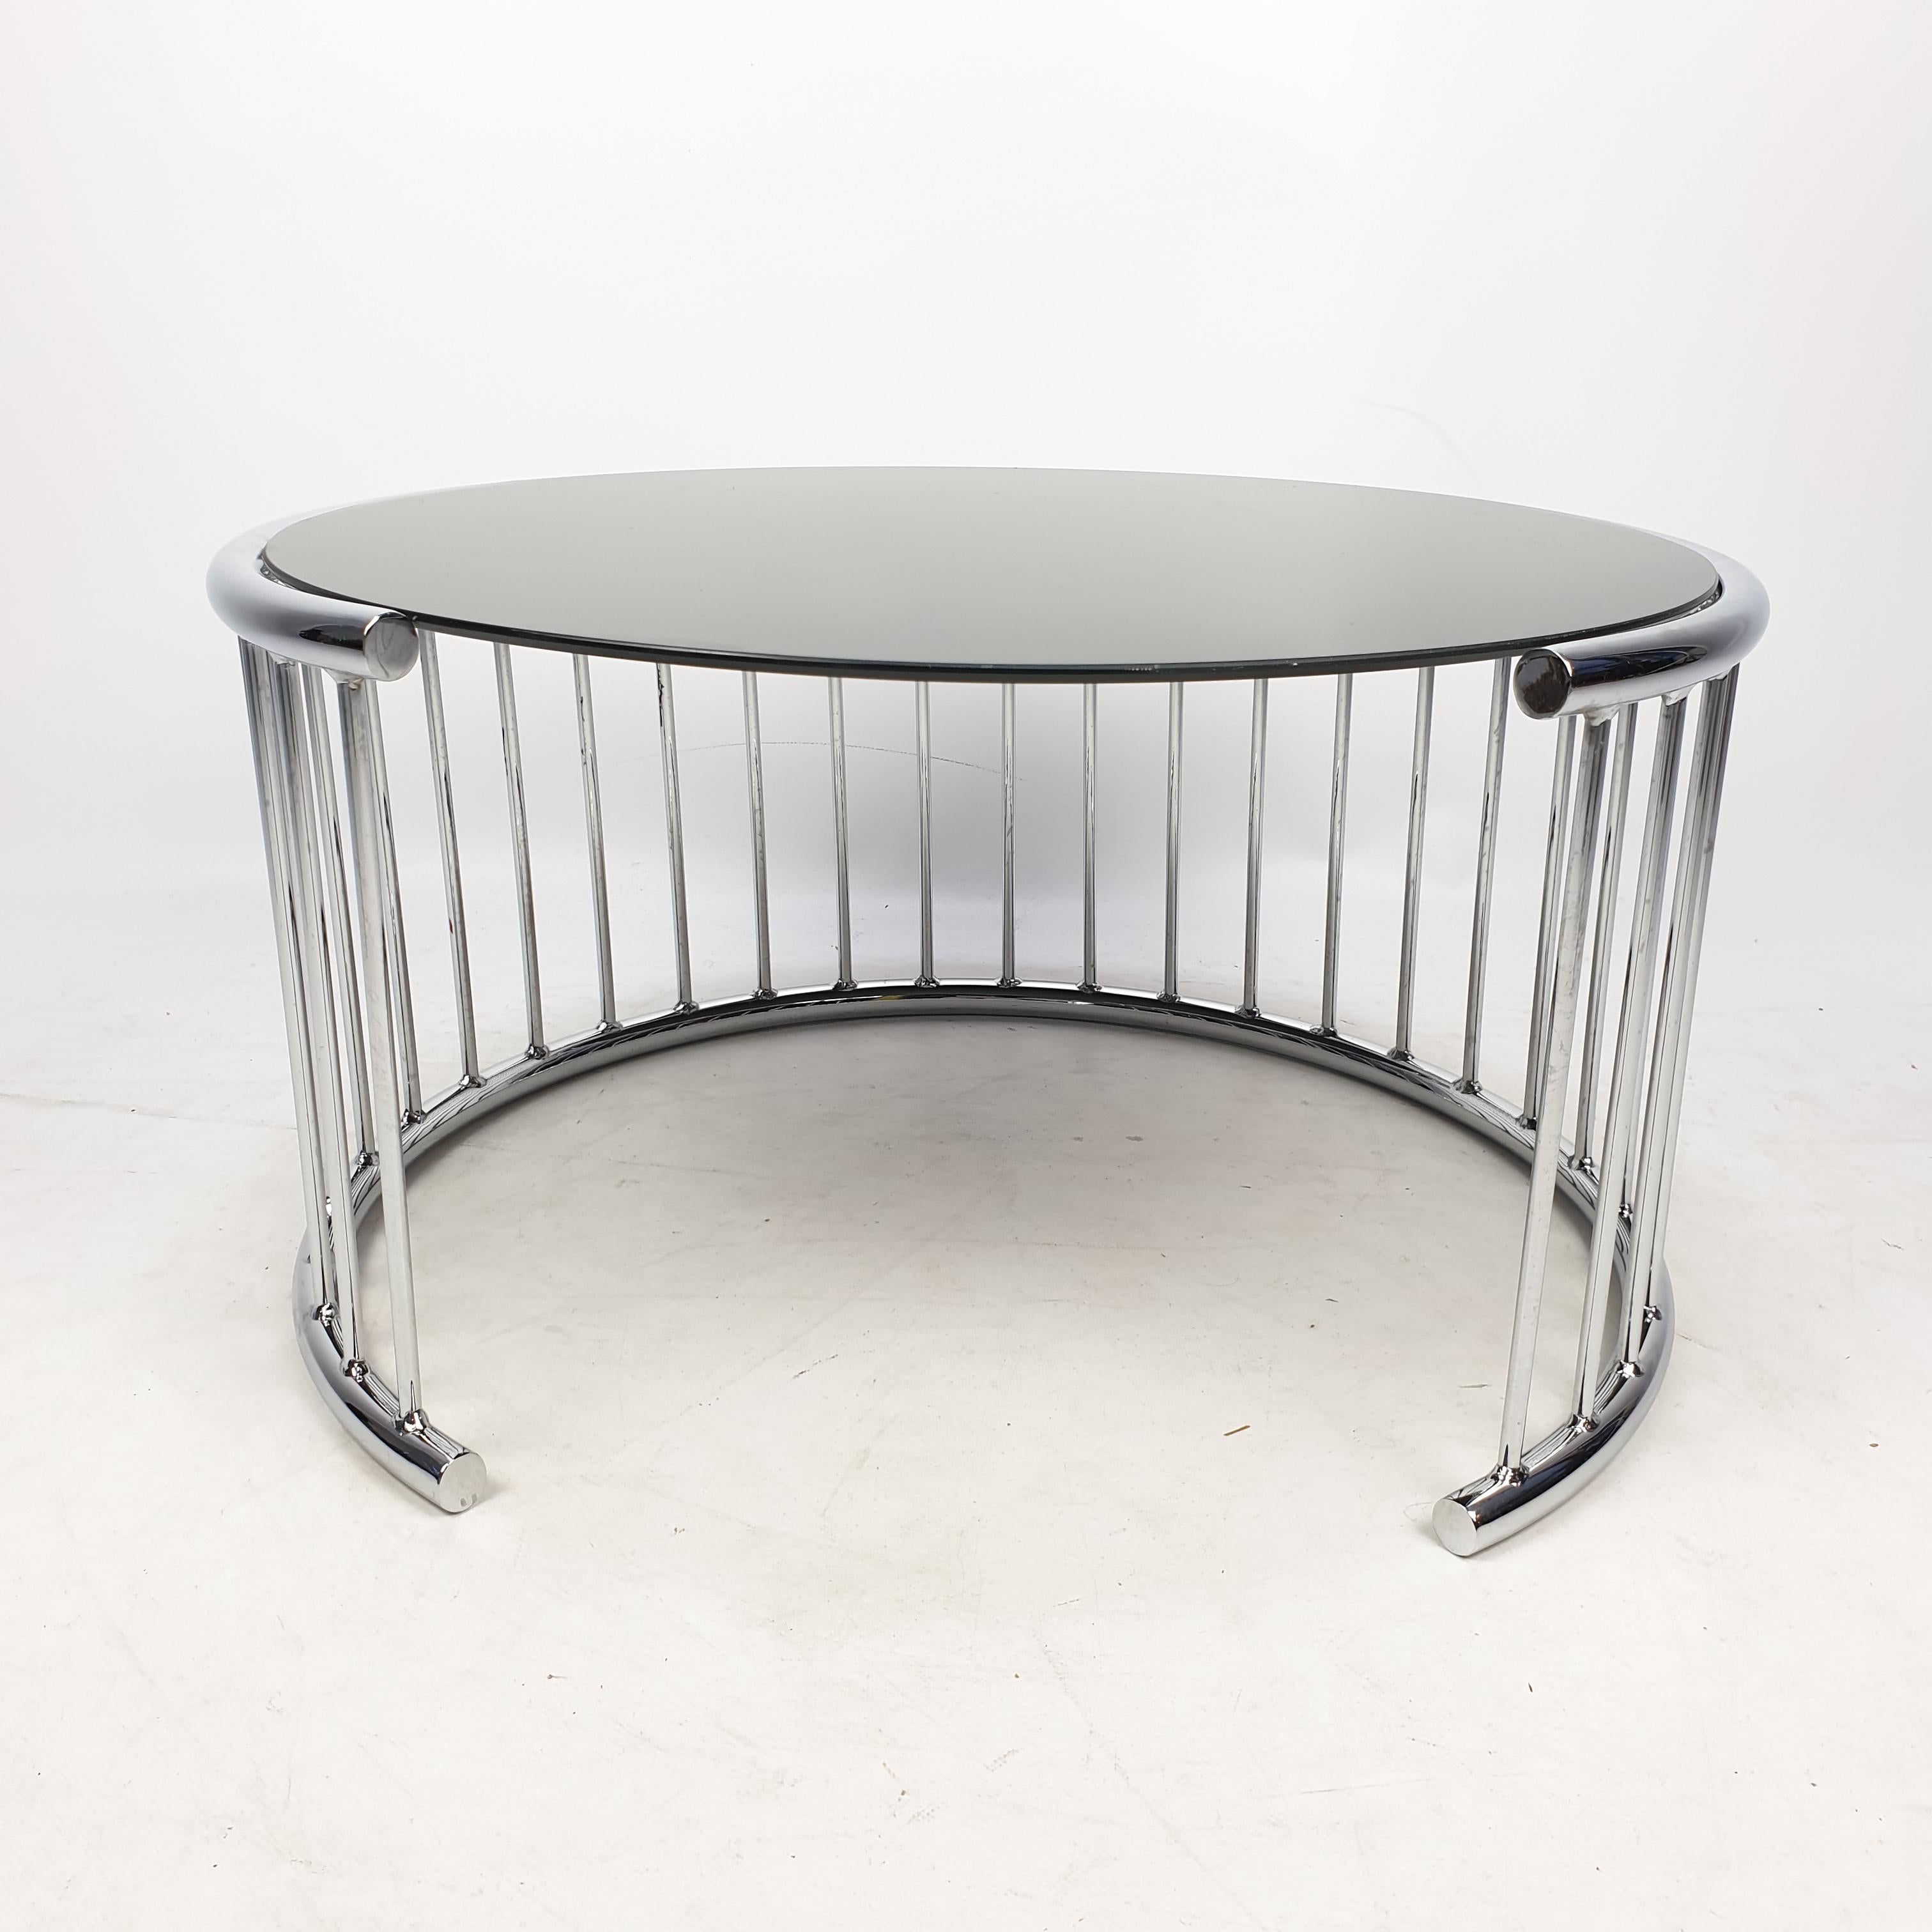 Very nice coffee table, designed in Italy in the 80's. 

Chrome tubes in a open circle with a round glass plate.